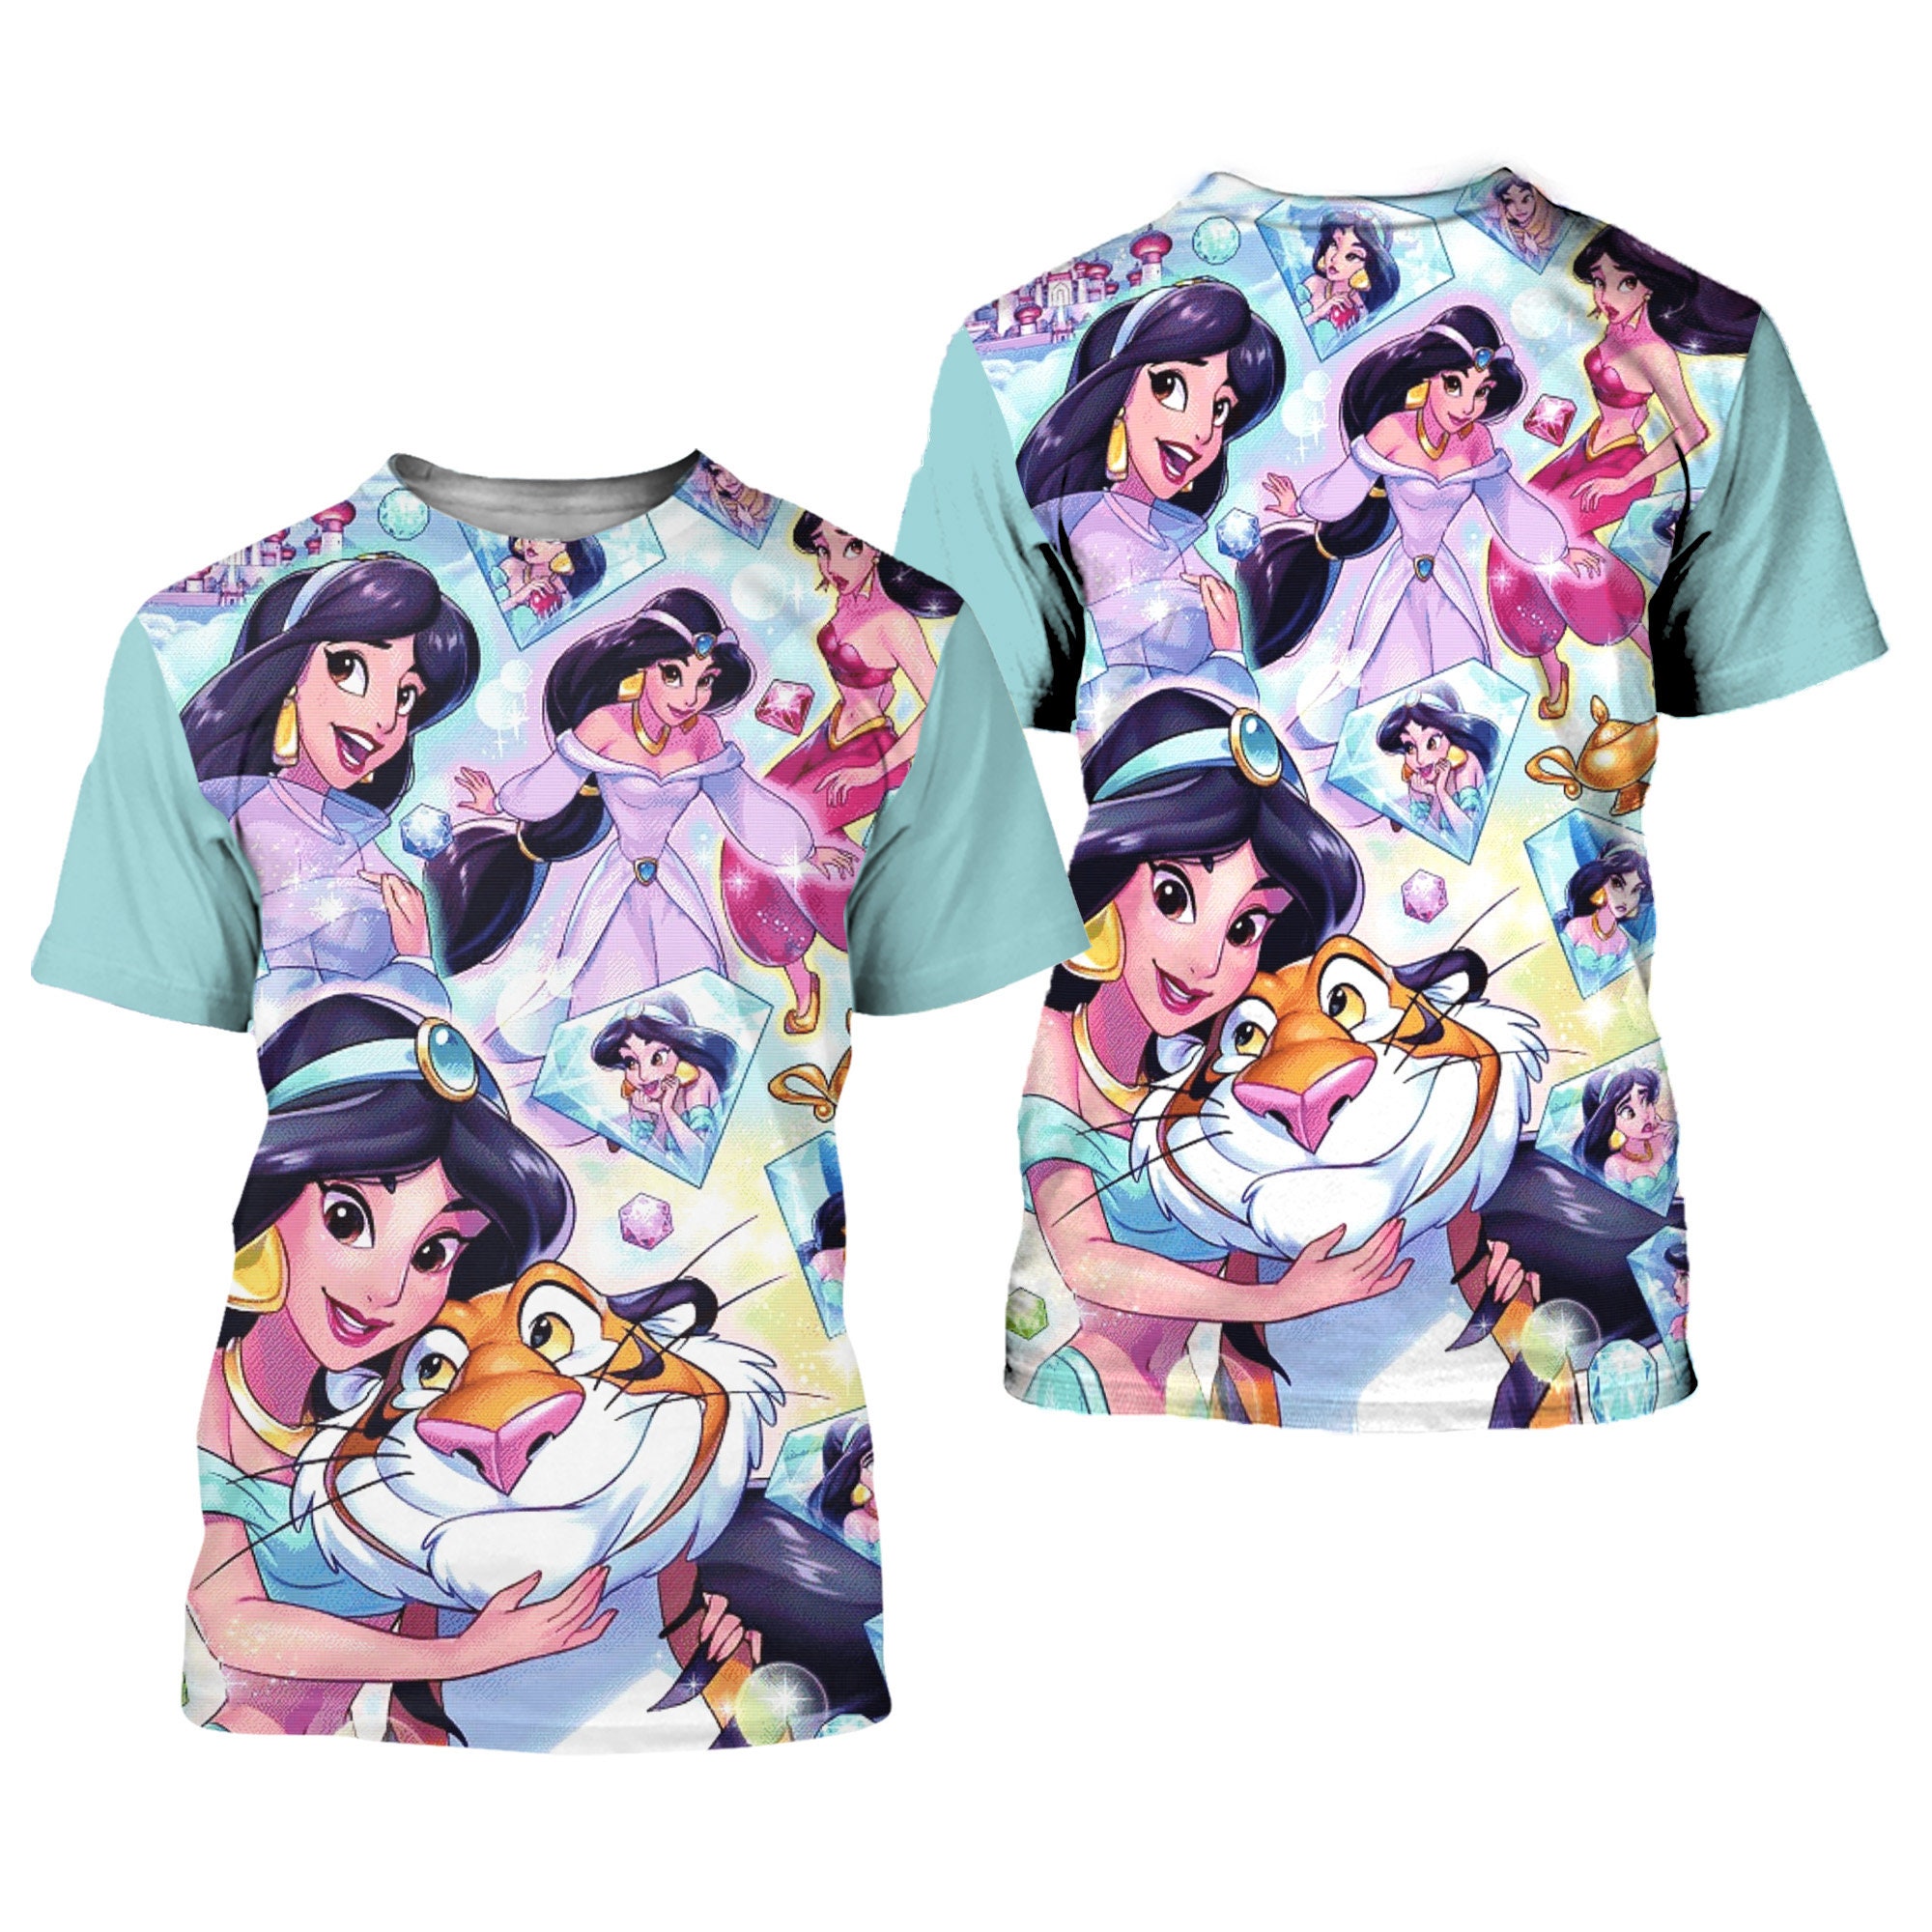 Discover Jasmine & Rajah Clear Button Overalls Patterns Disney Outfits Unisex Casual T-shirts 3D